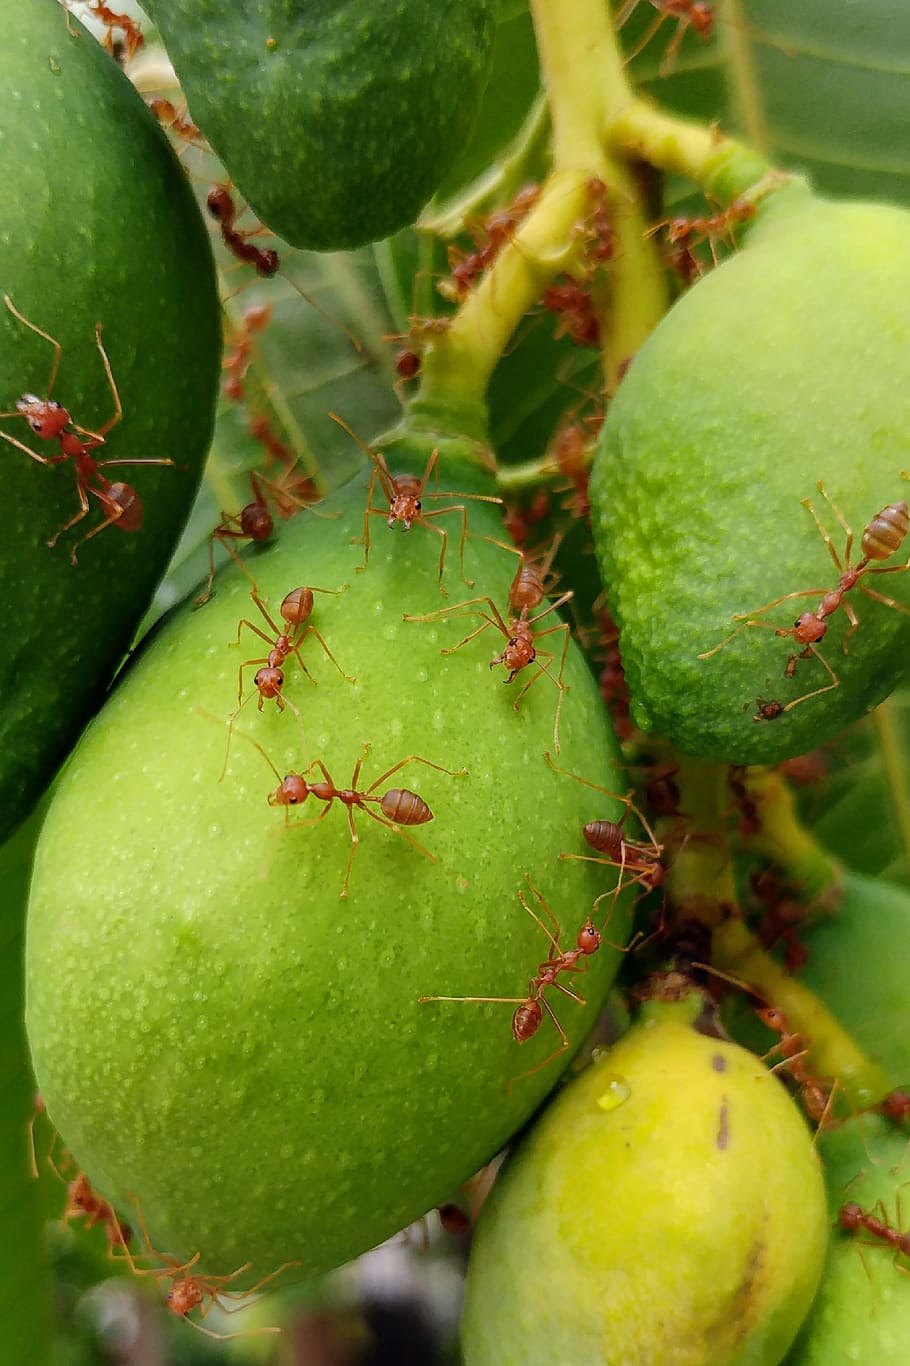 fire ants, red ants, ants, insects, manggo, fruit, green color, healthy eating, food, food and drink